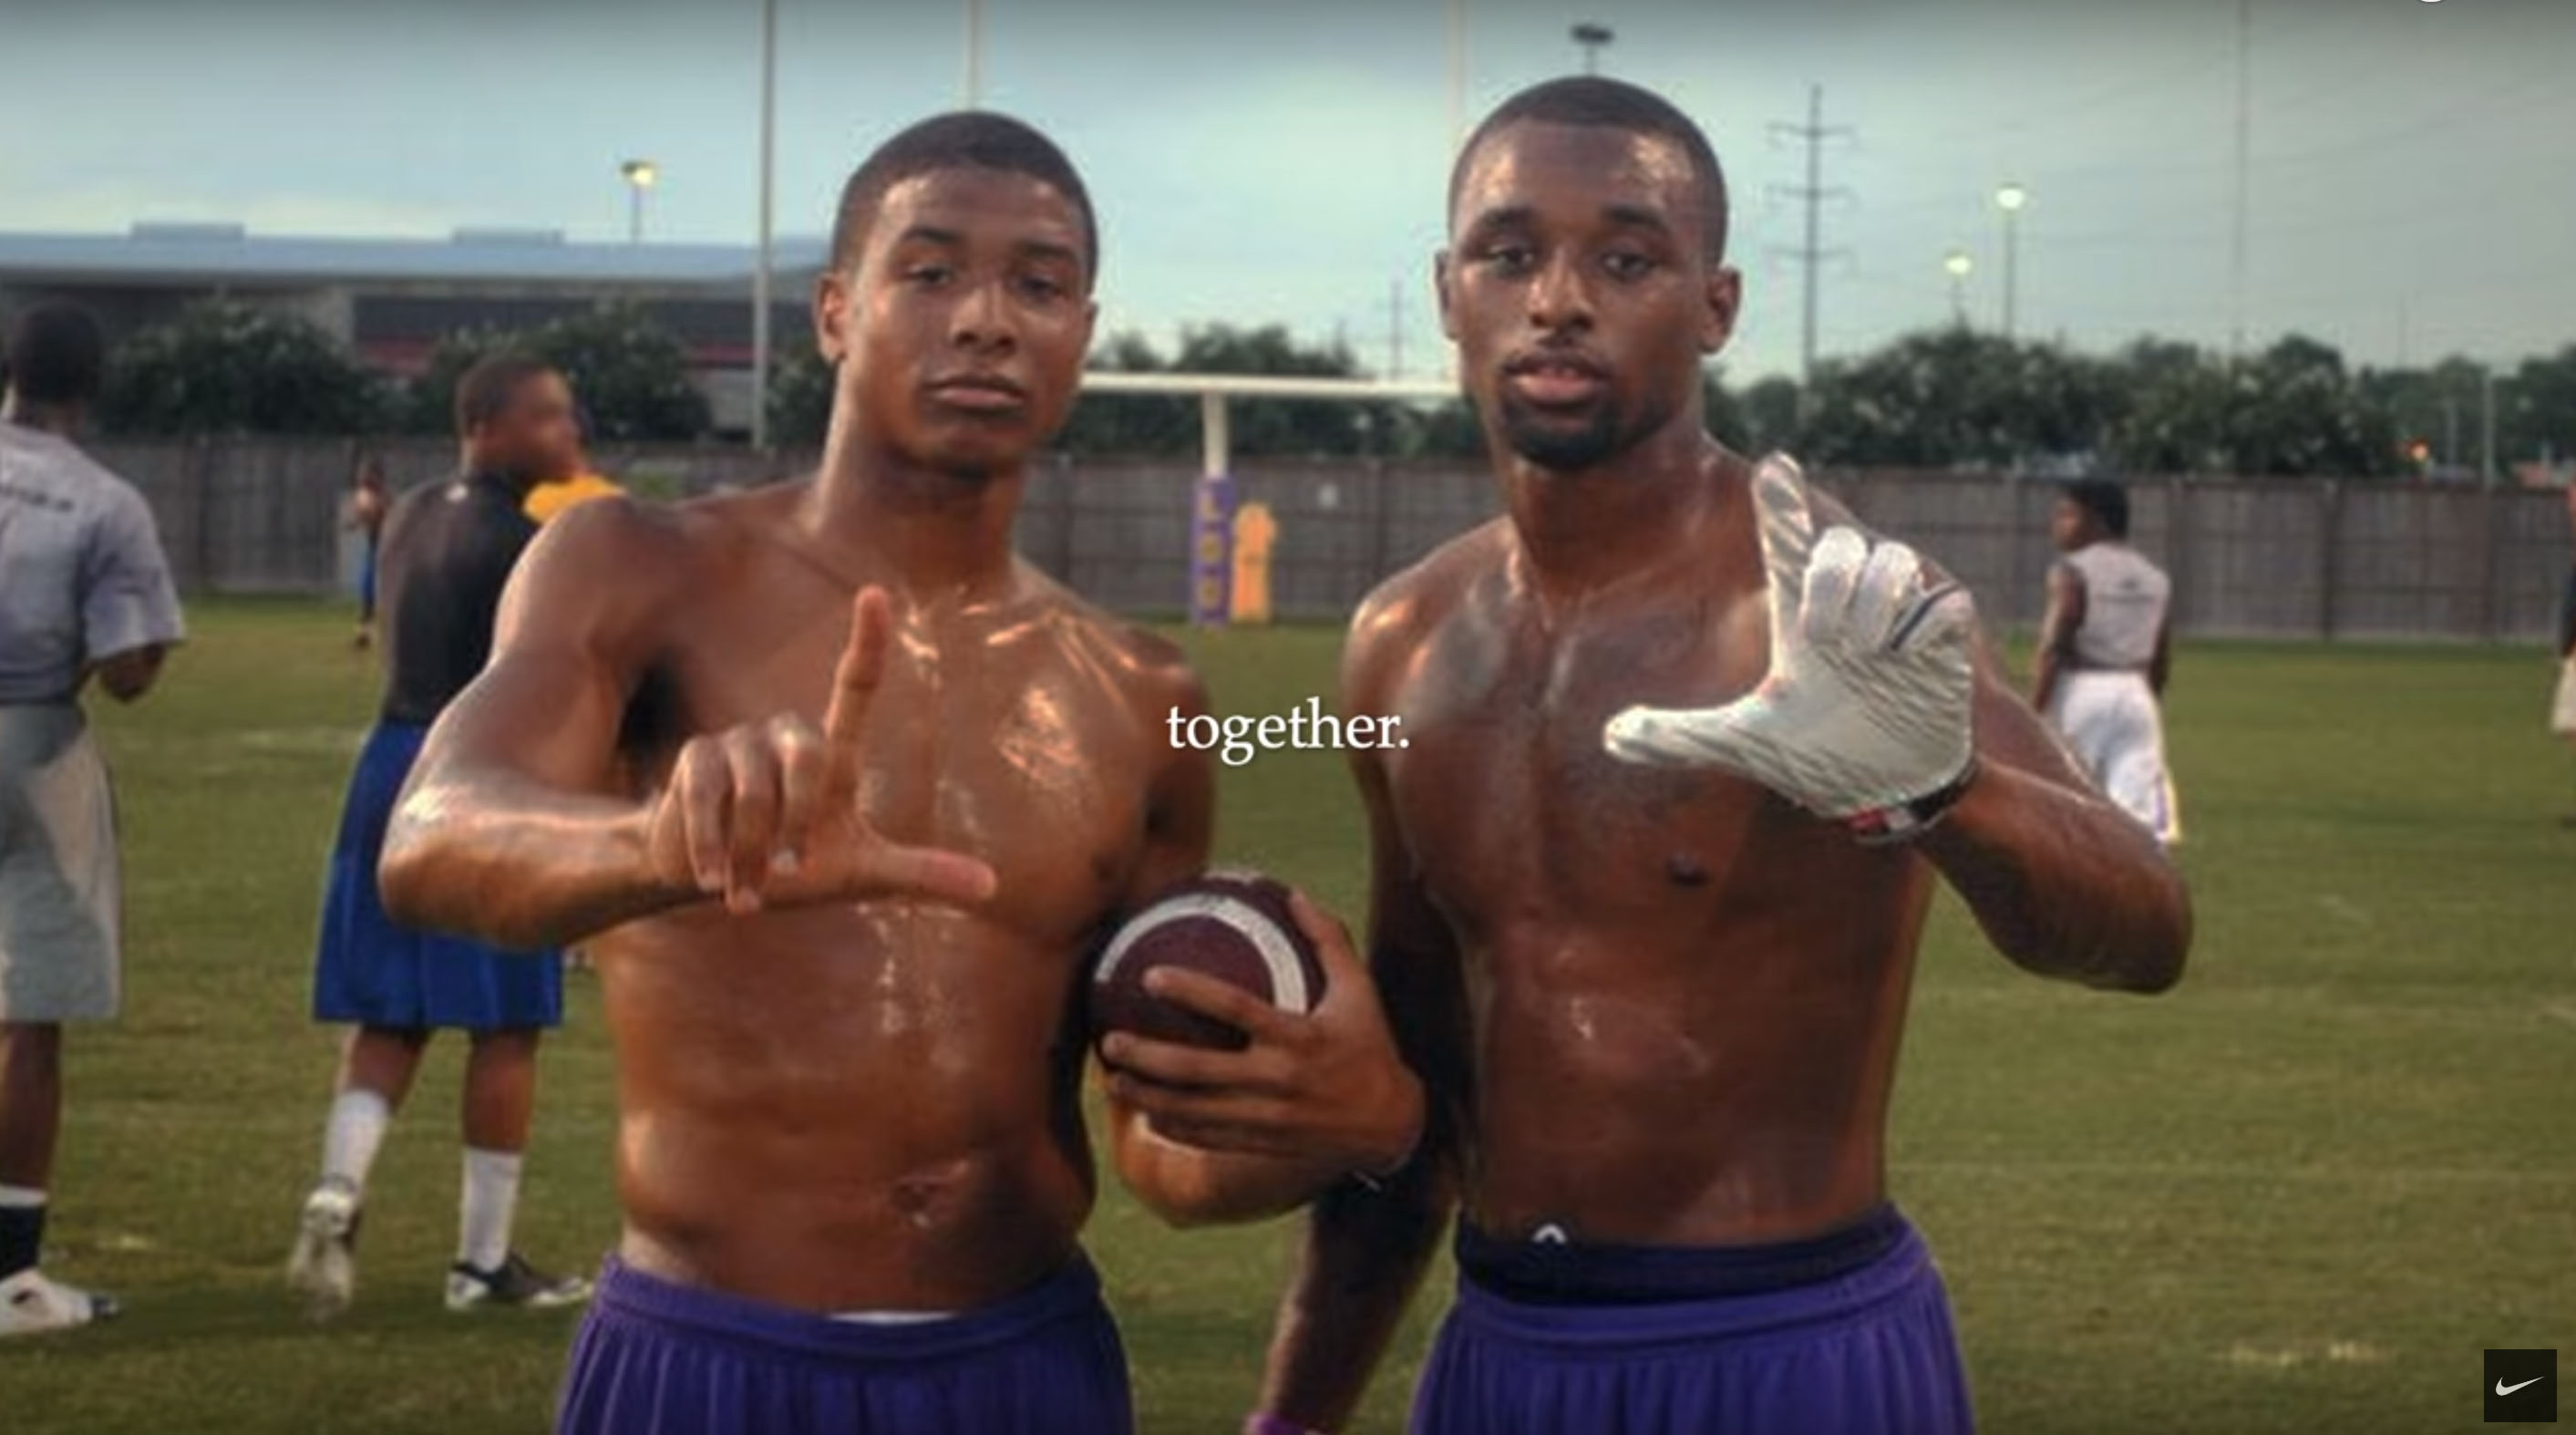 Browns stars OBJ, Jarvis Landry star in Nike commercial - Sports Illustrated